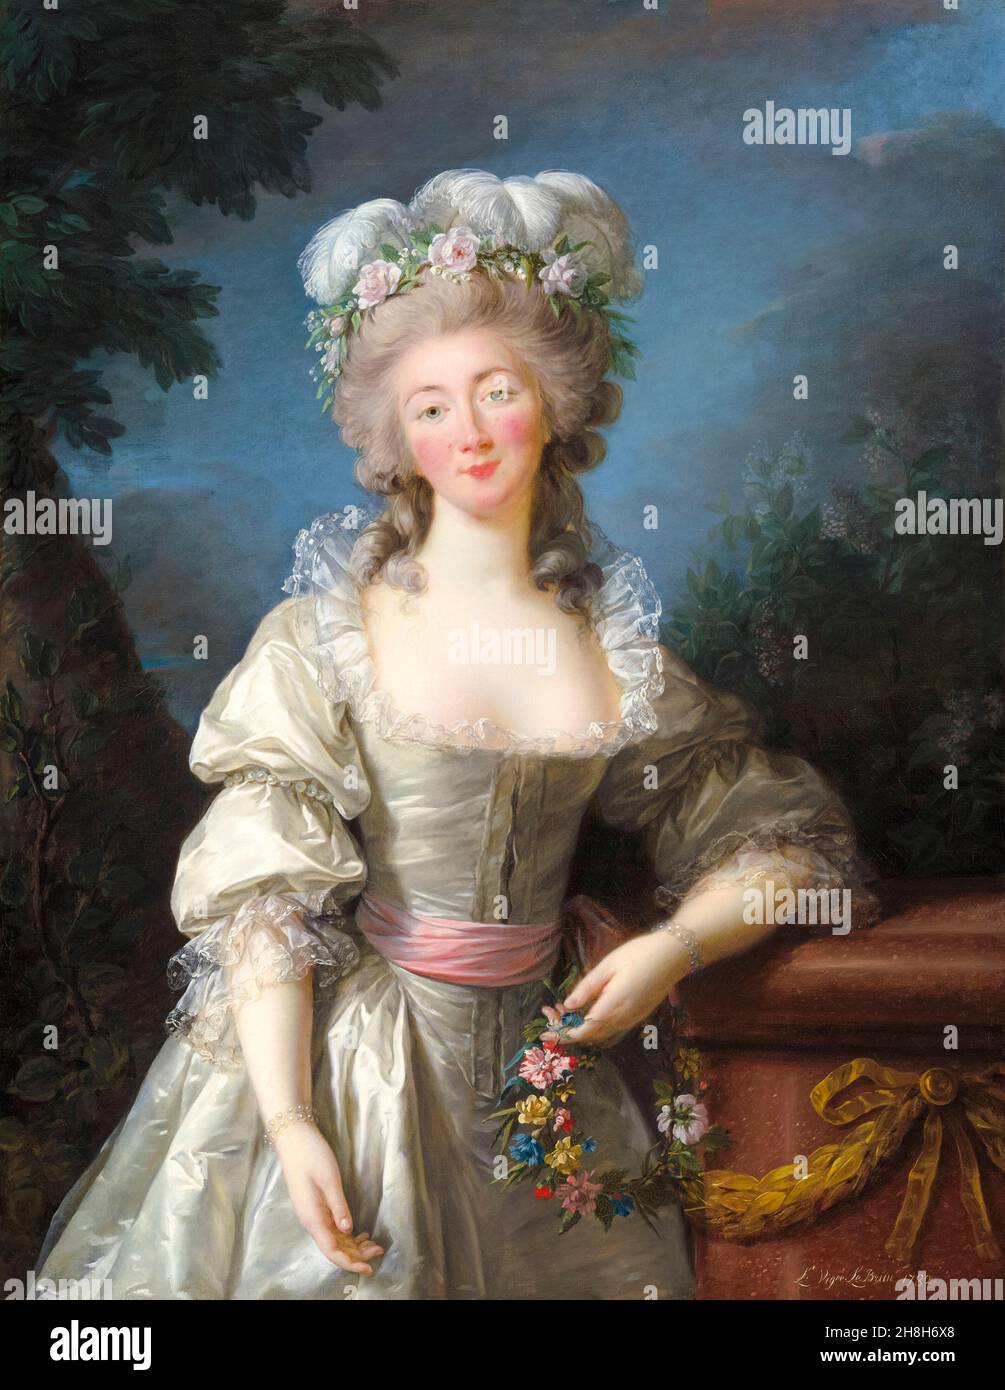 Elisabeth Vigee le Brun ritratto pittura, Madame du Barry, 1782 Foto Stock